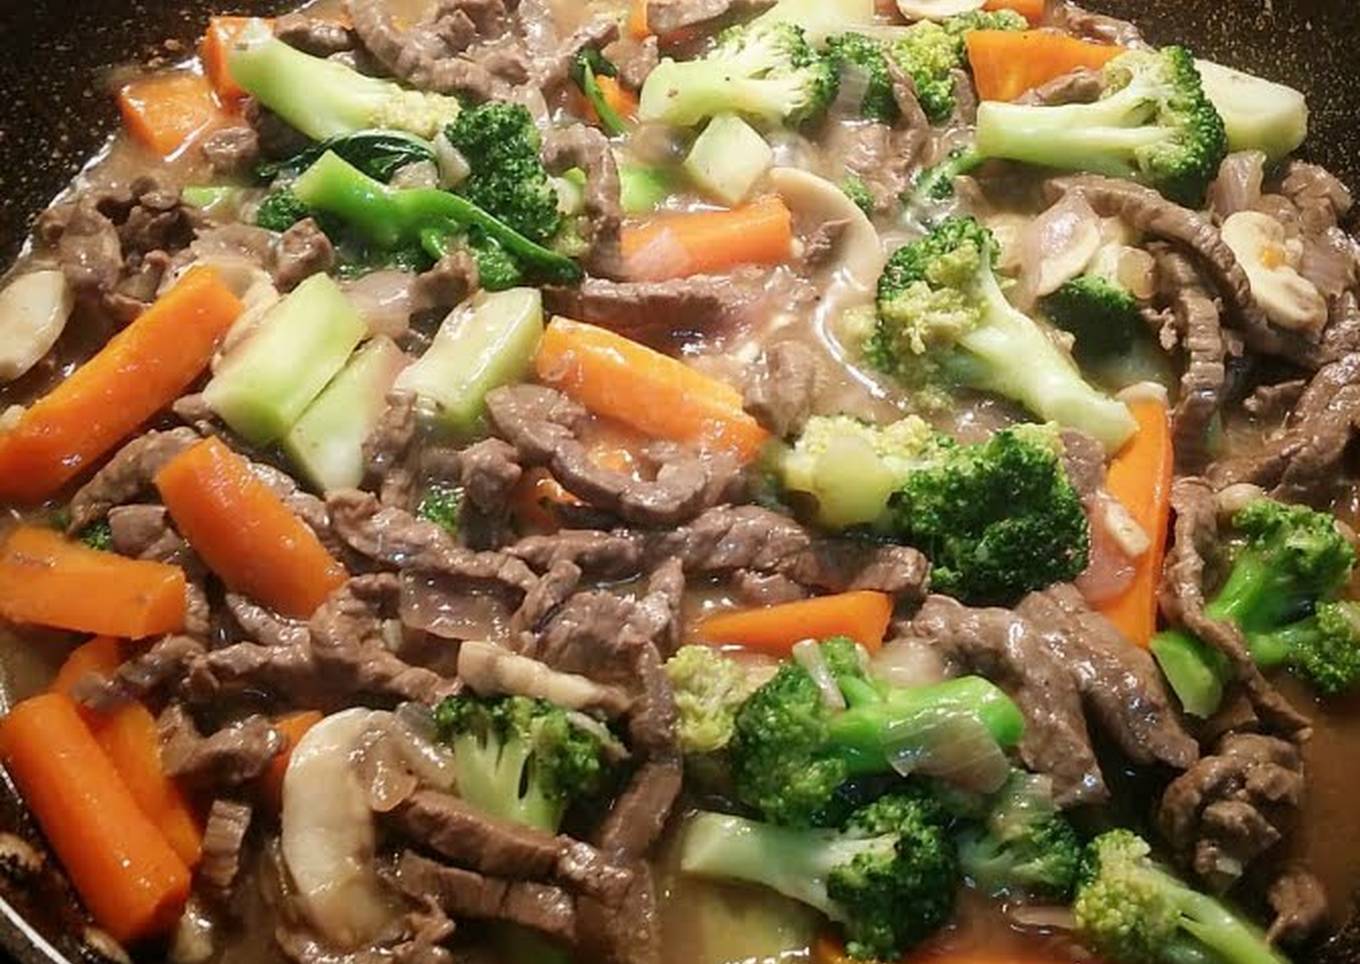 beef broccoli with mushroom in oyster sauce